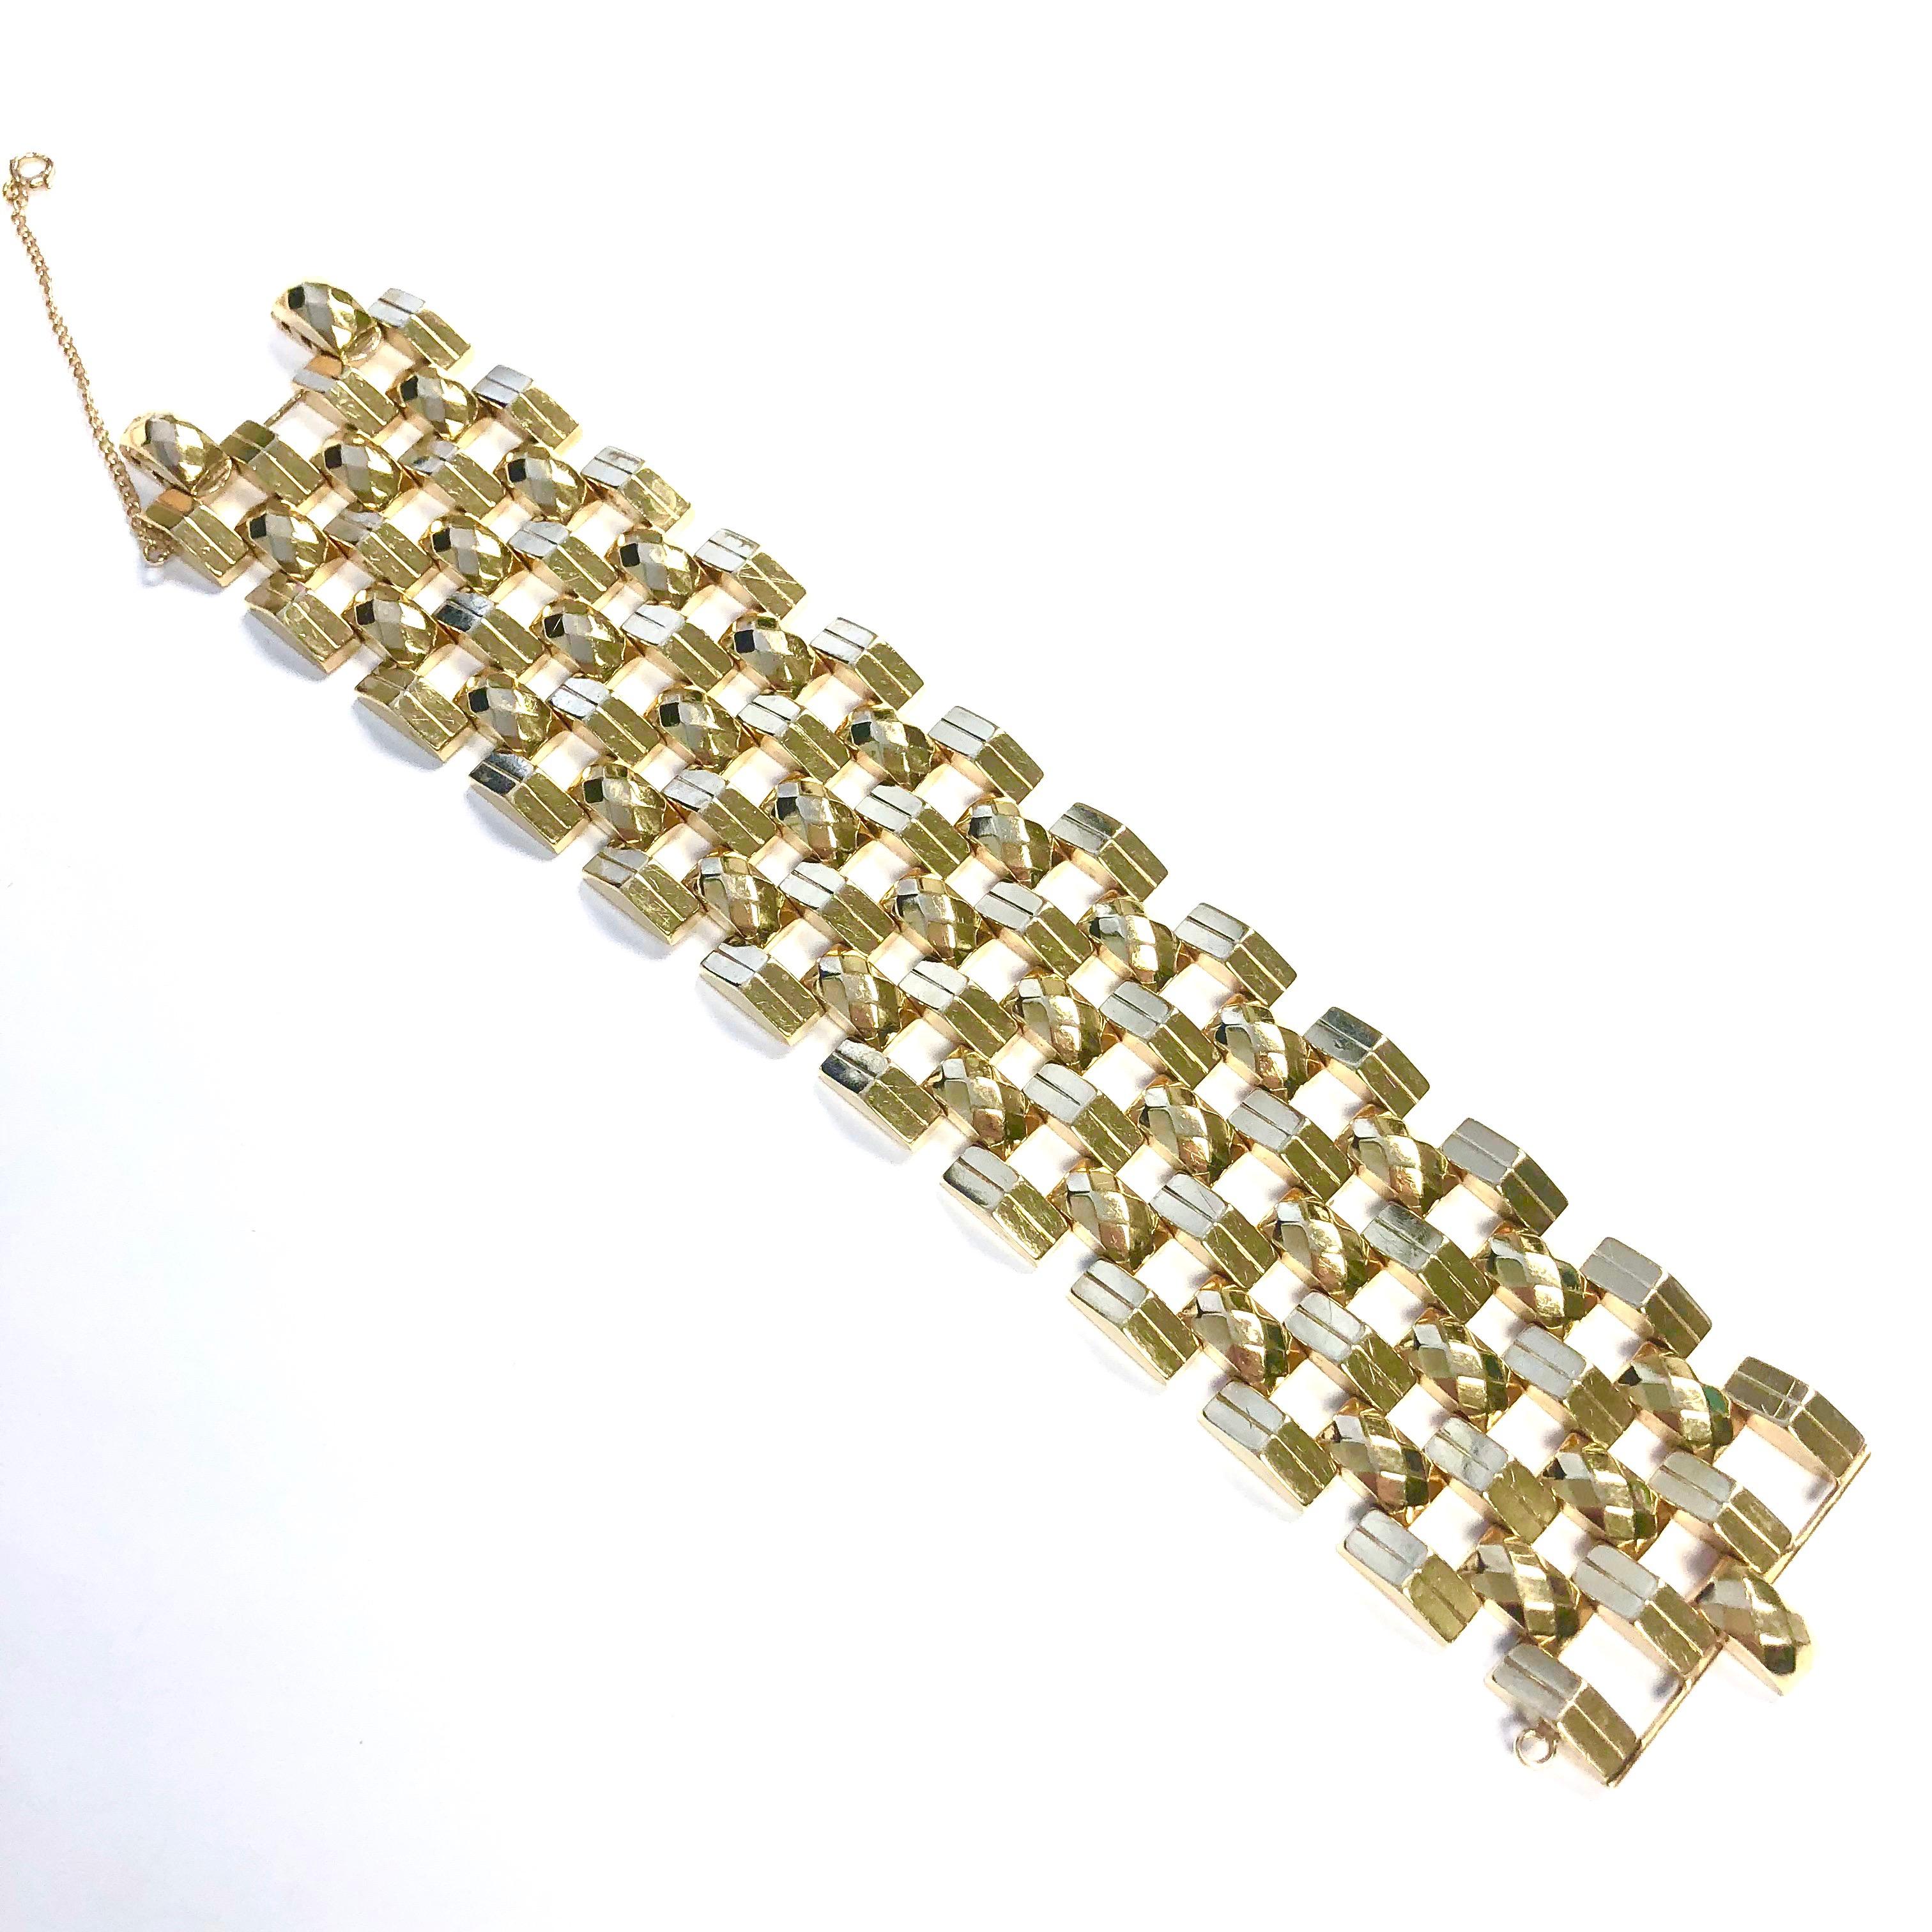 Crafted in 14K yellow gold, the bracelet is composed of four rows of cascading triangular shaped links alternating with three rows of faceted cushion shaped links. 
Measurements: 
Length: 7.5 inches
Width: 1.5 inches
Weight: 64.9 grams